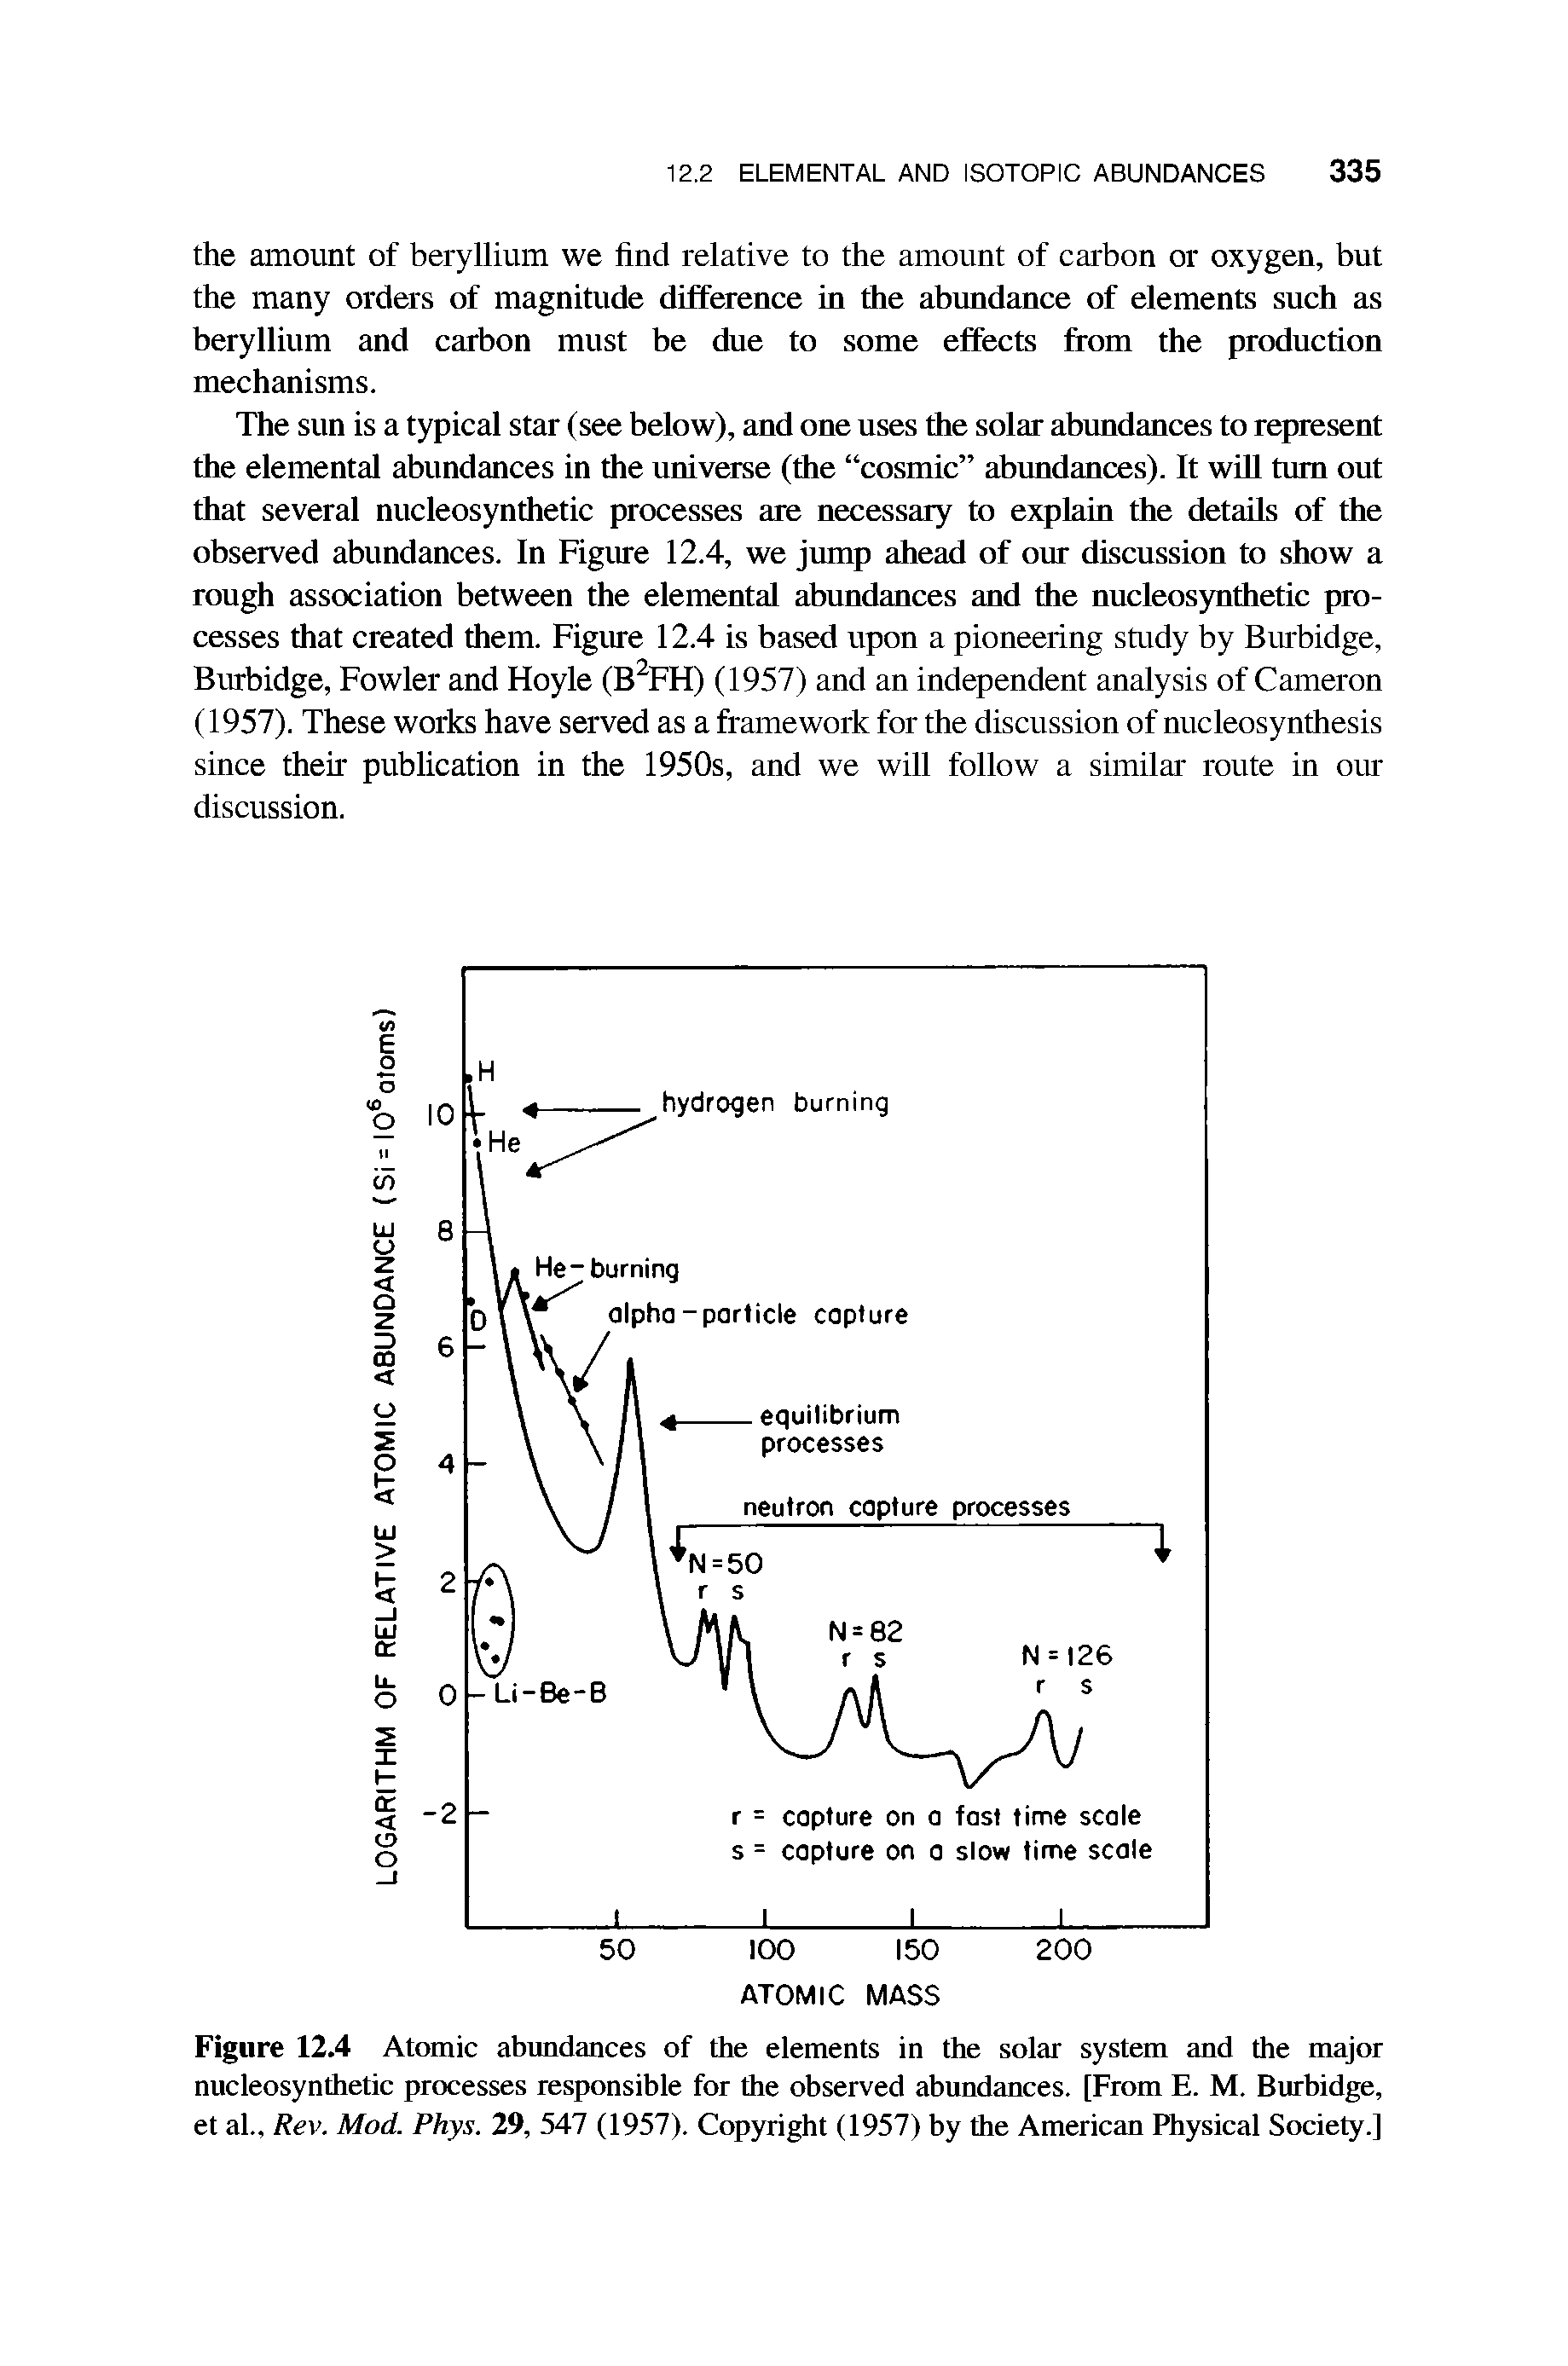 Figure 12.4 Atomic abundances of the elements in the solar system and the major nucleosynthetic processes responsible for the observed abundances. [From E. M. Burbidge, et al., Rev. Mod. Phys. 29, 547 (1957). Copyright (1957) by the American Physical Society.]...